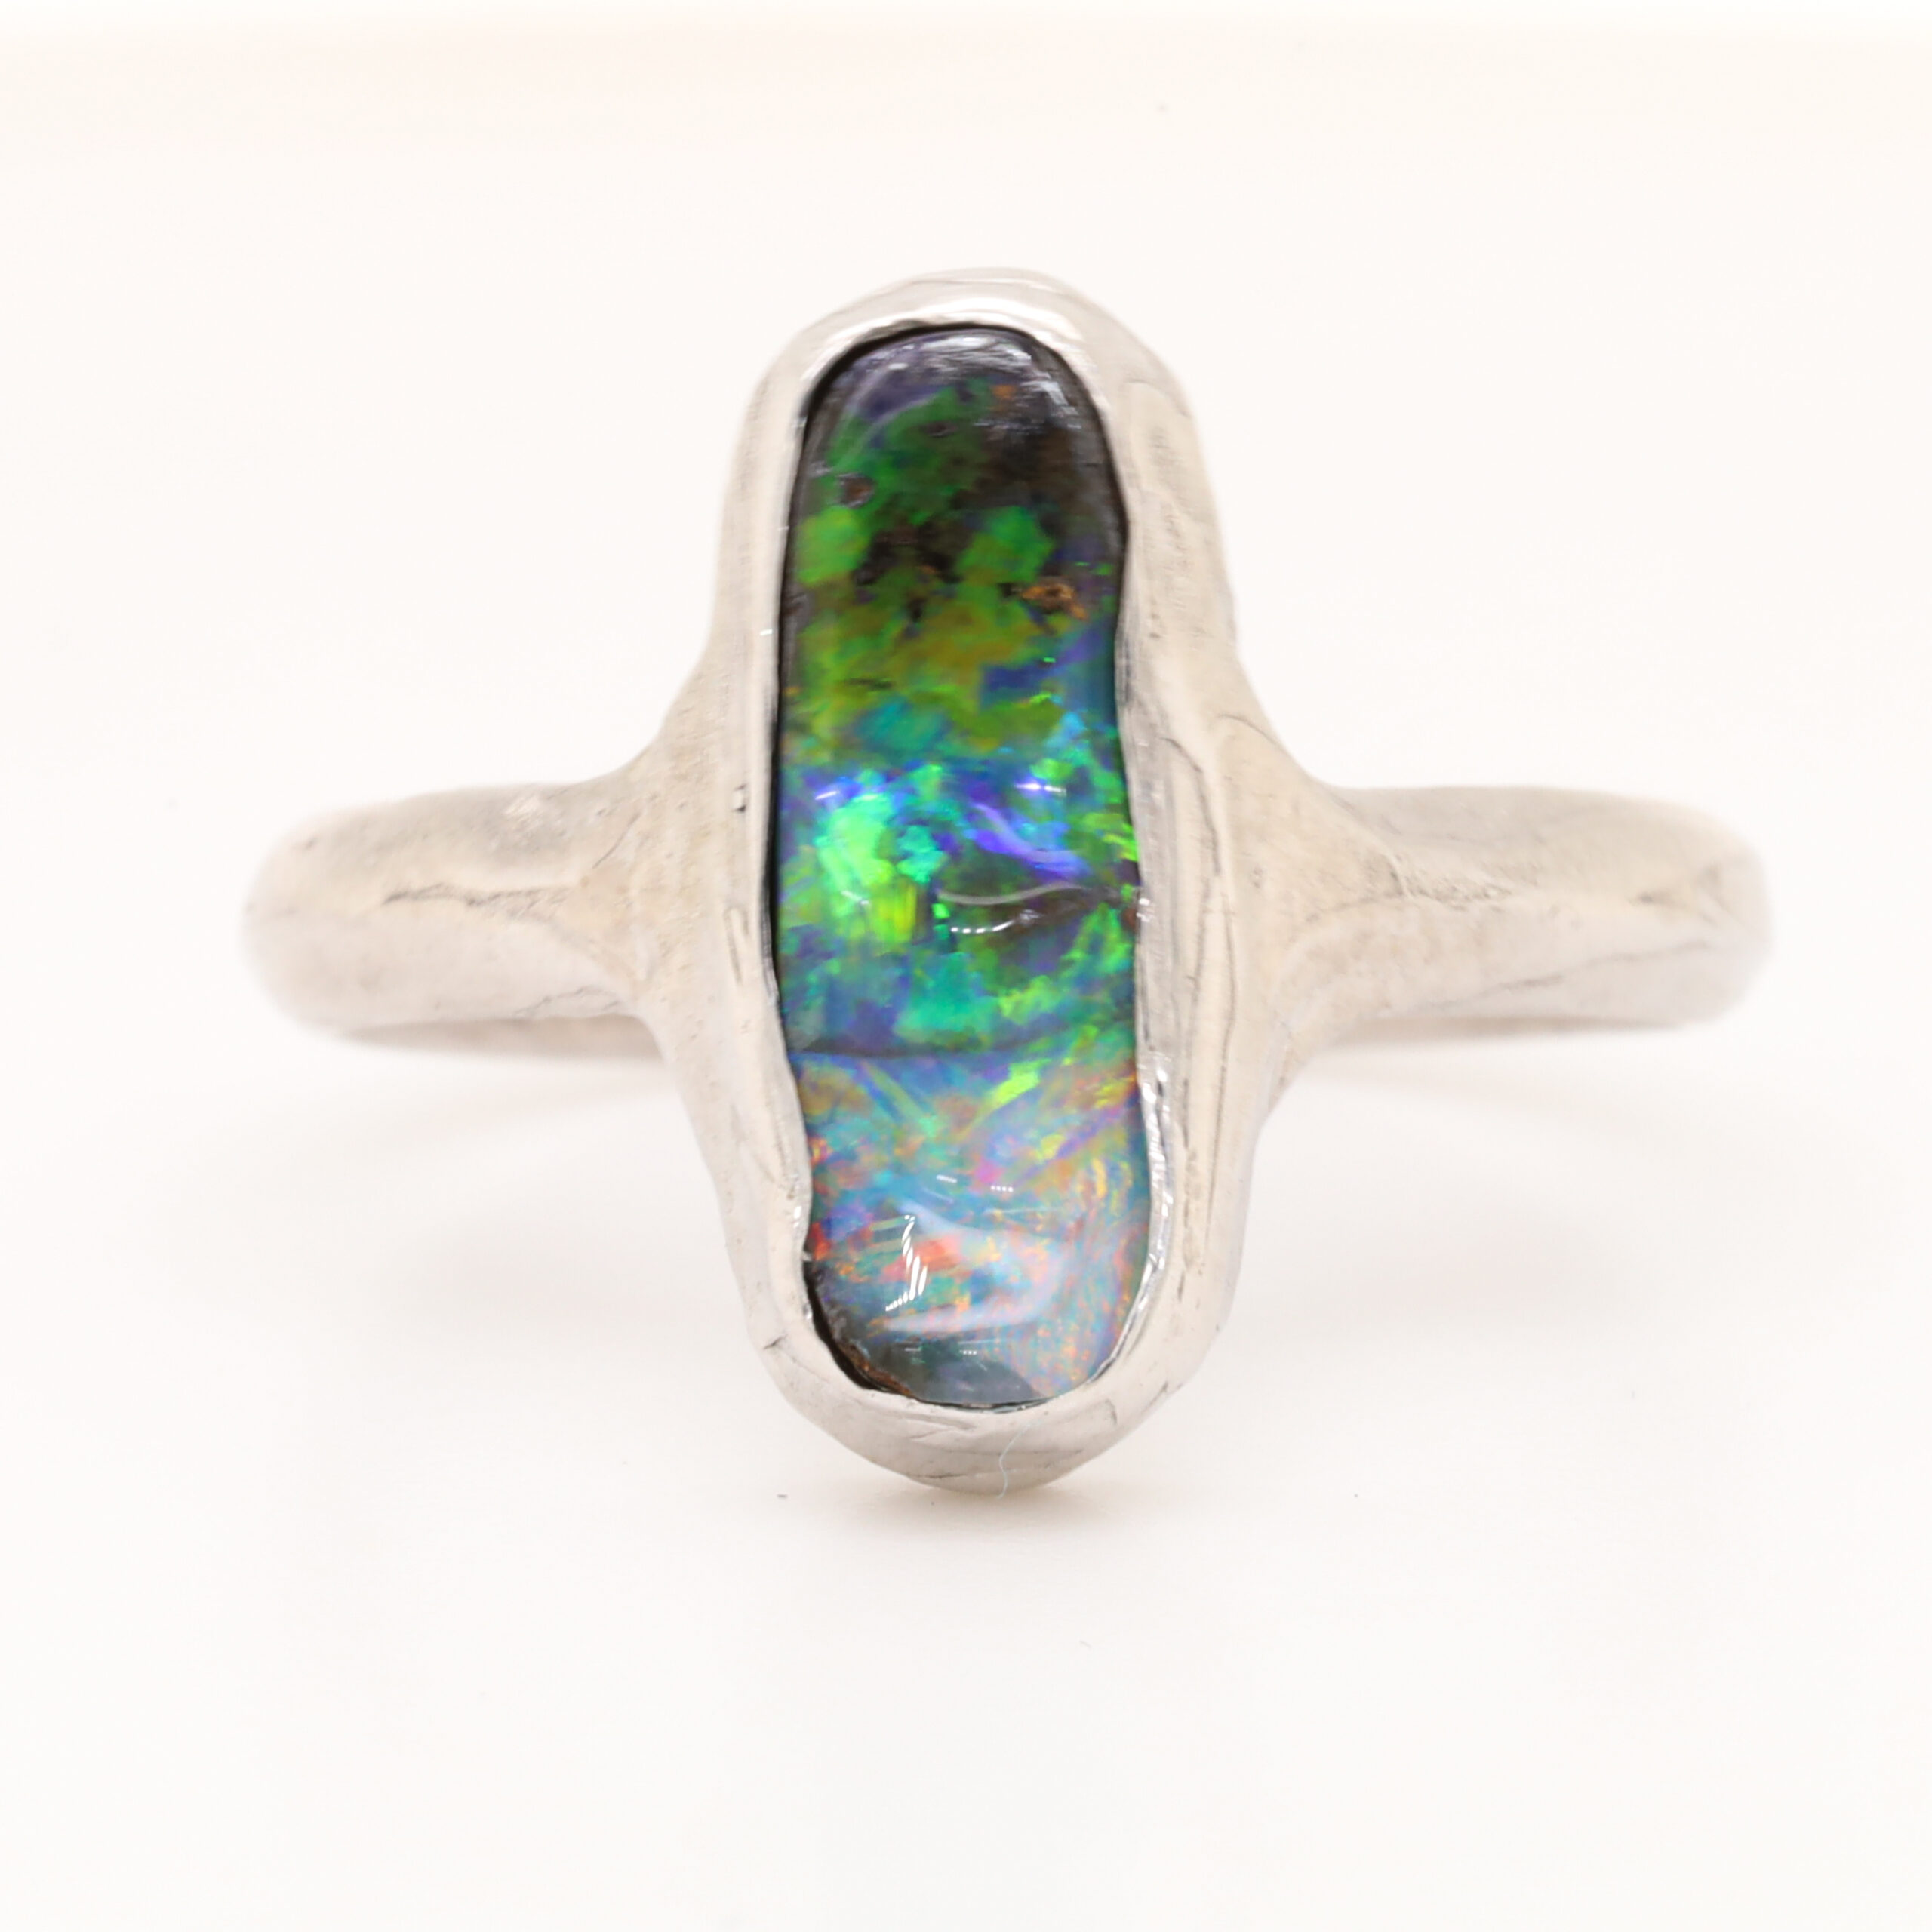 Blue, Pink and Green Sterling Silver Solid Australian Boulder Opal Ring